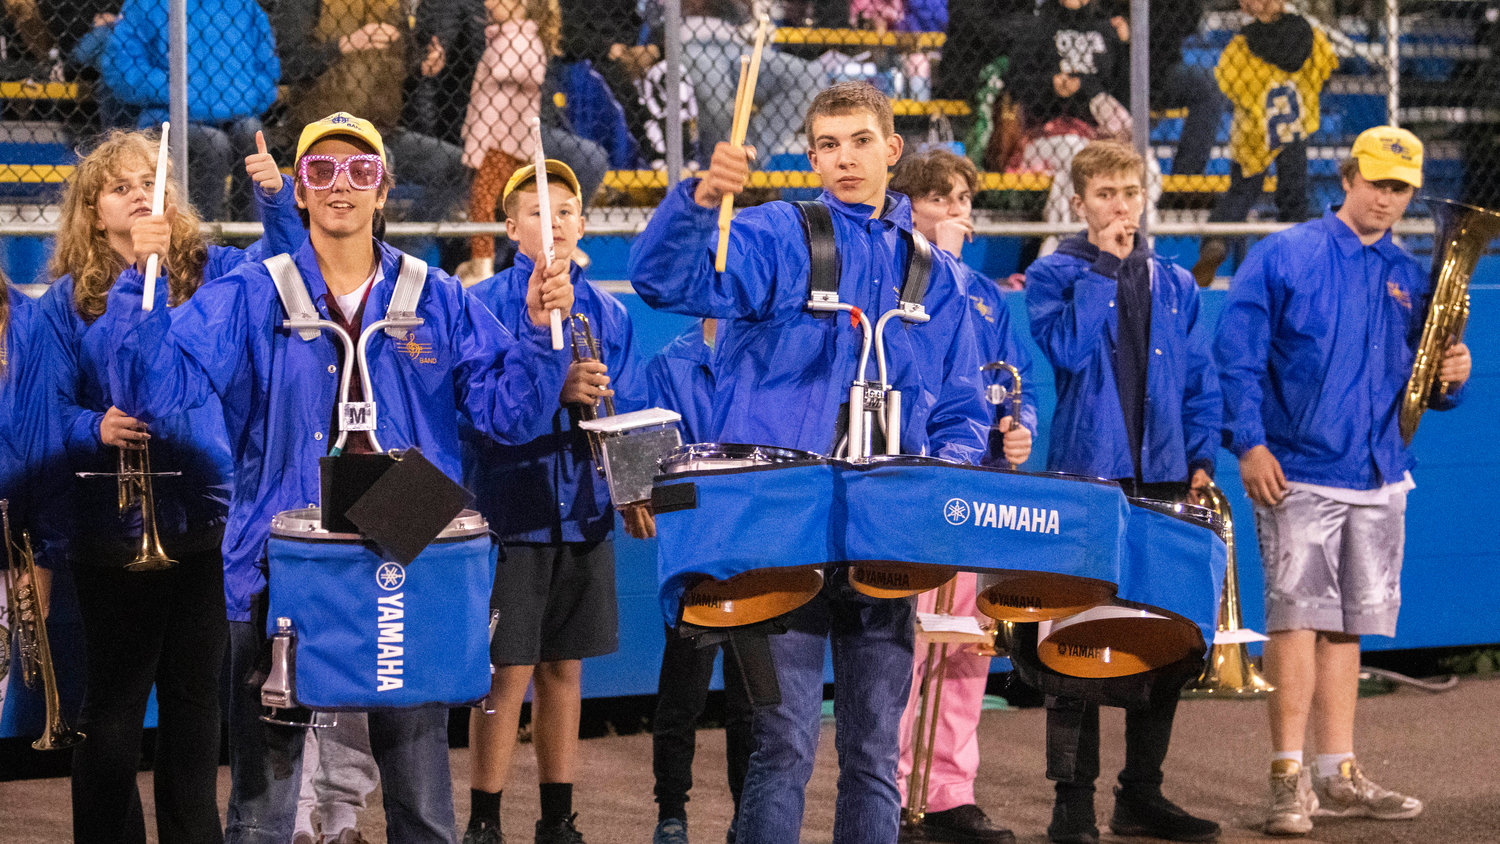 Members of the Adna High School band prepare to take the field at halftime during a Thursday night game at Pirate Stadium.